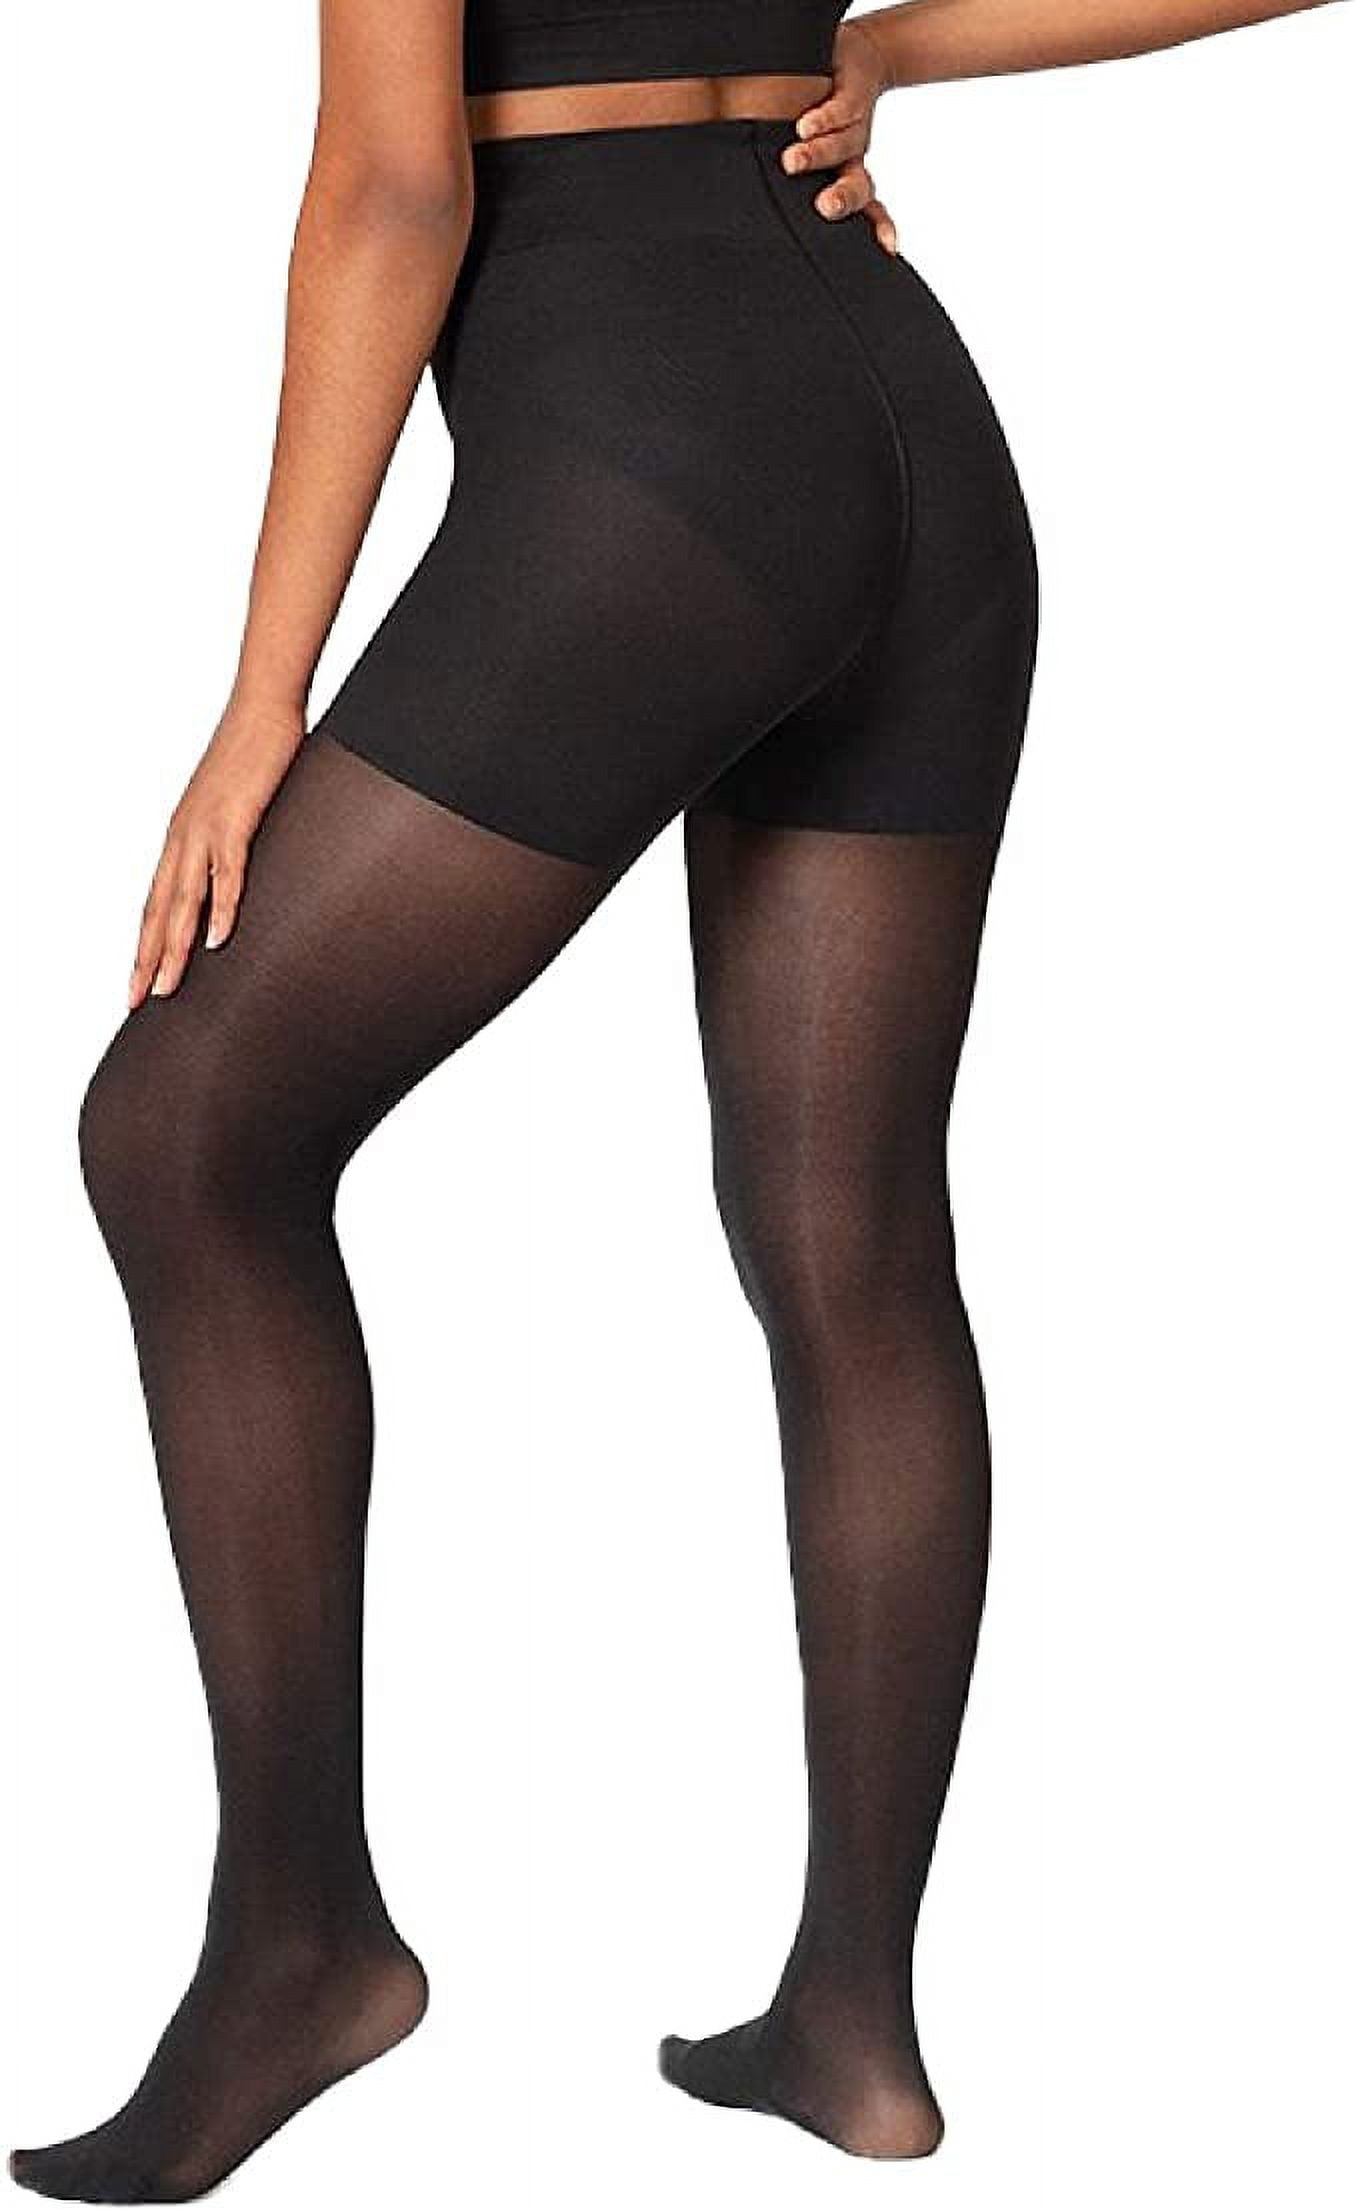 Shapermint Solid Black Opaque Tights with Nylon Control Top Hosiery  Pantyhose (Large) 